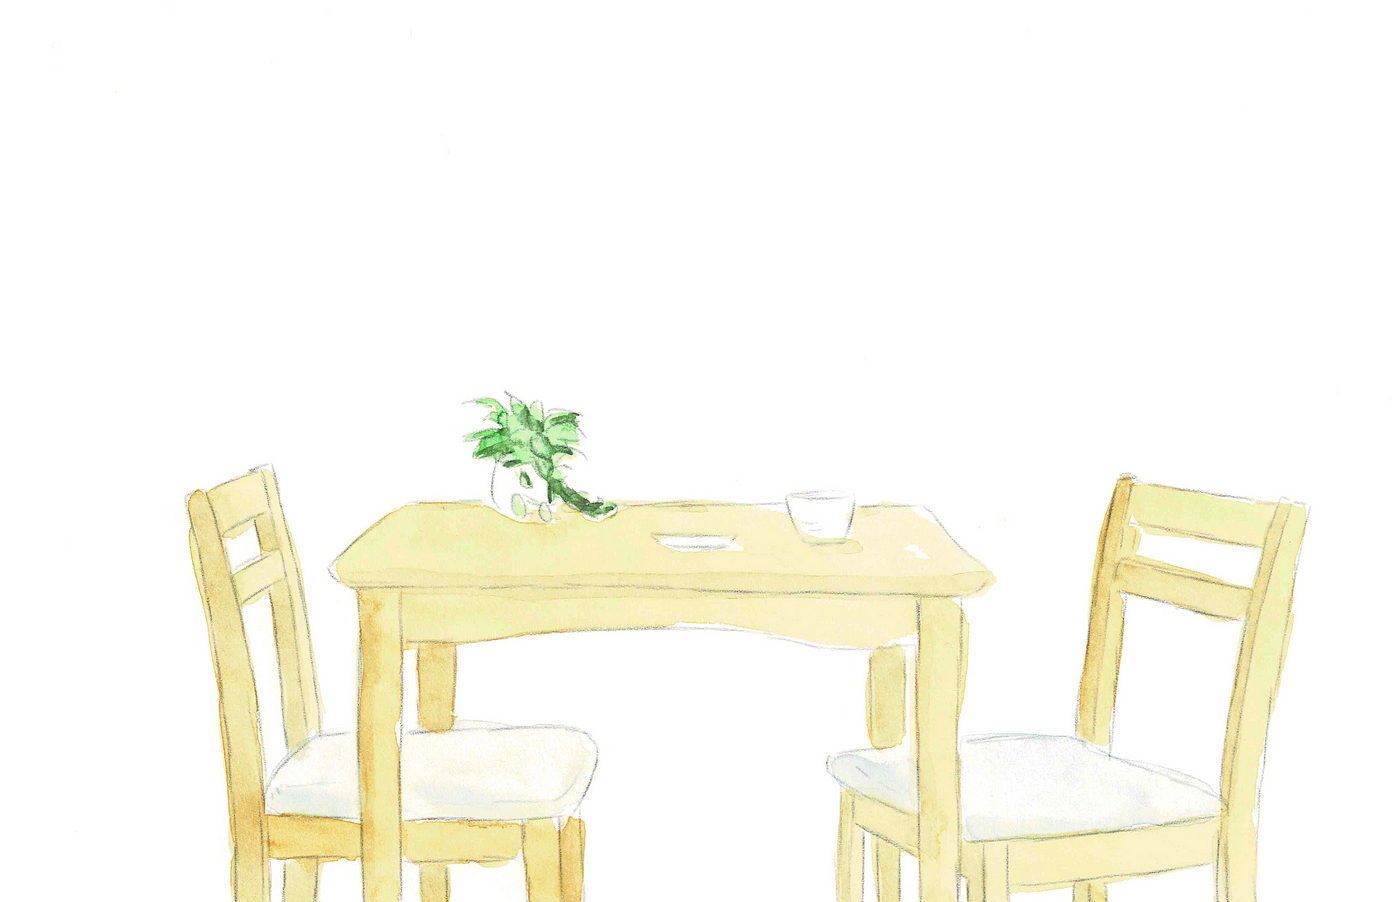 A watercolor illustration of a small wooden kitchen table and two chairs